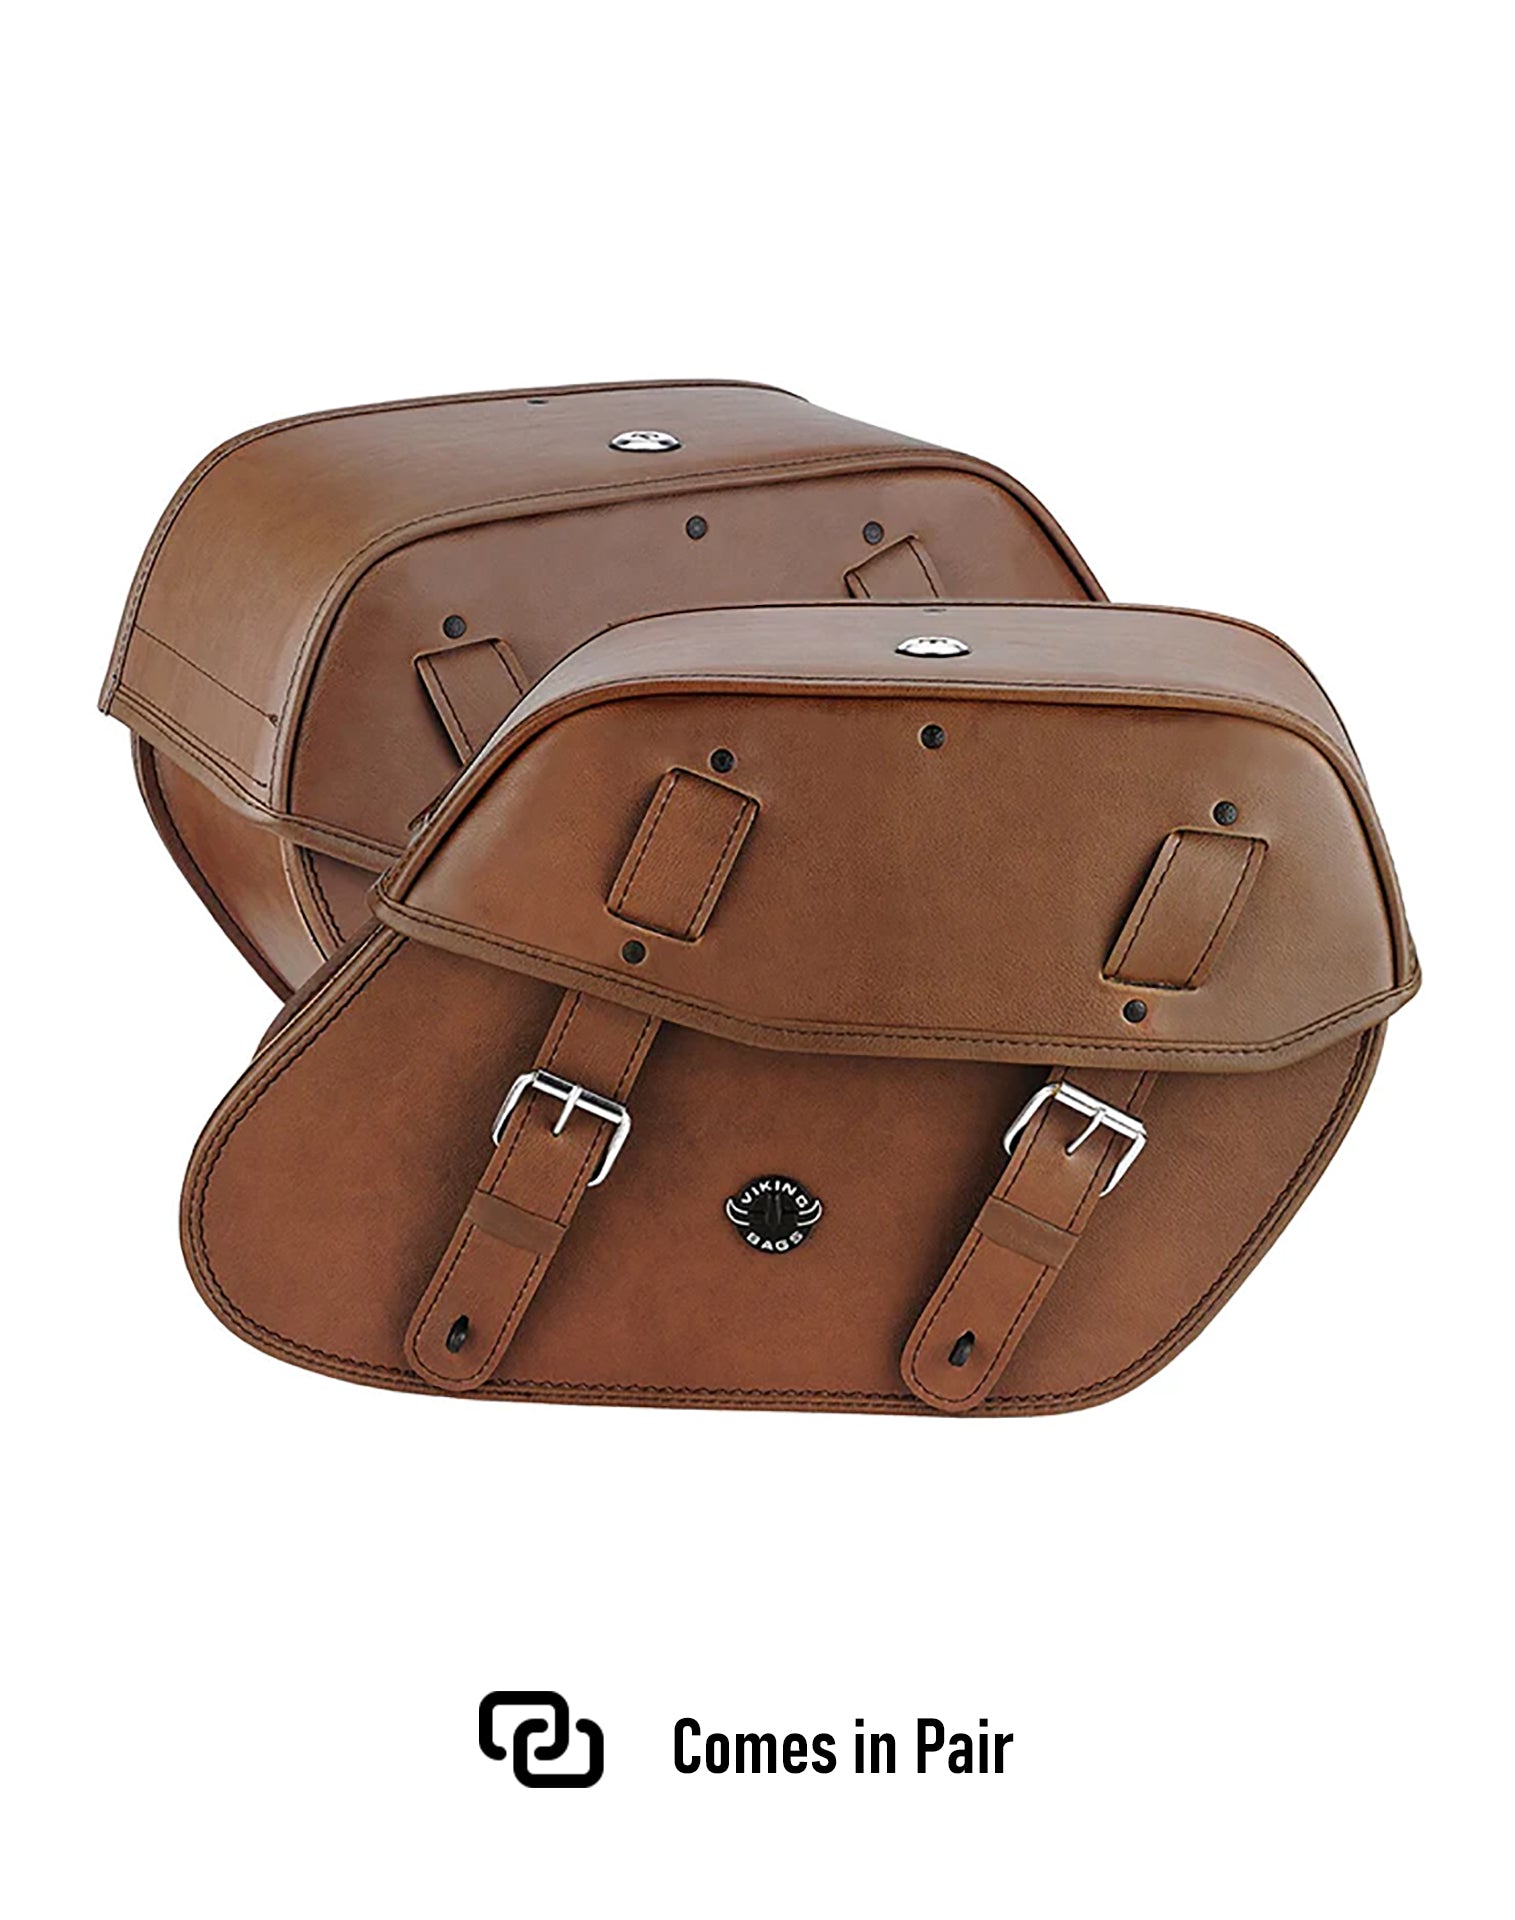 Viking Odin Brown Large Triumph Rocket Iii Classic Leather Motorcycle Saddlebags Weather Resistant Bags Comes in Pair